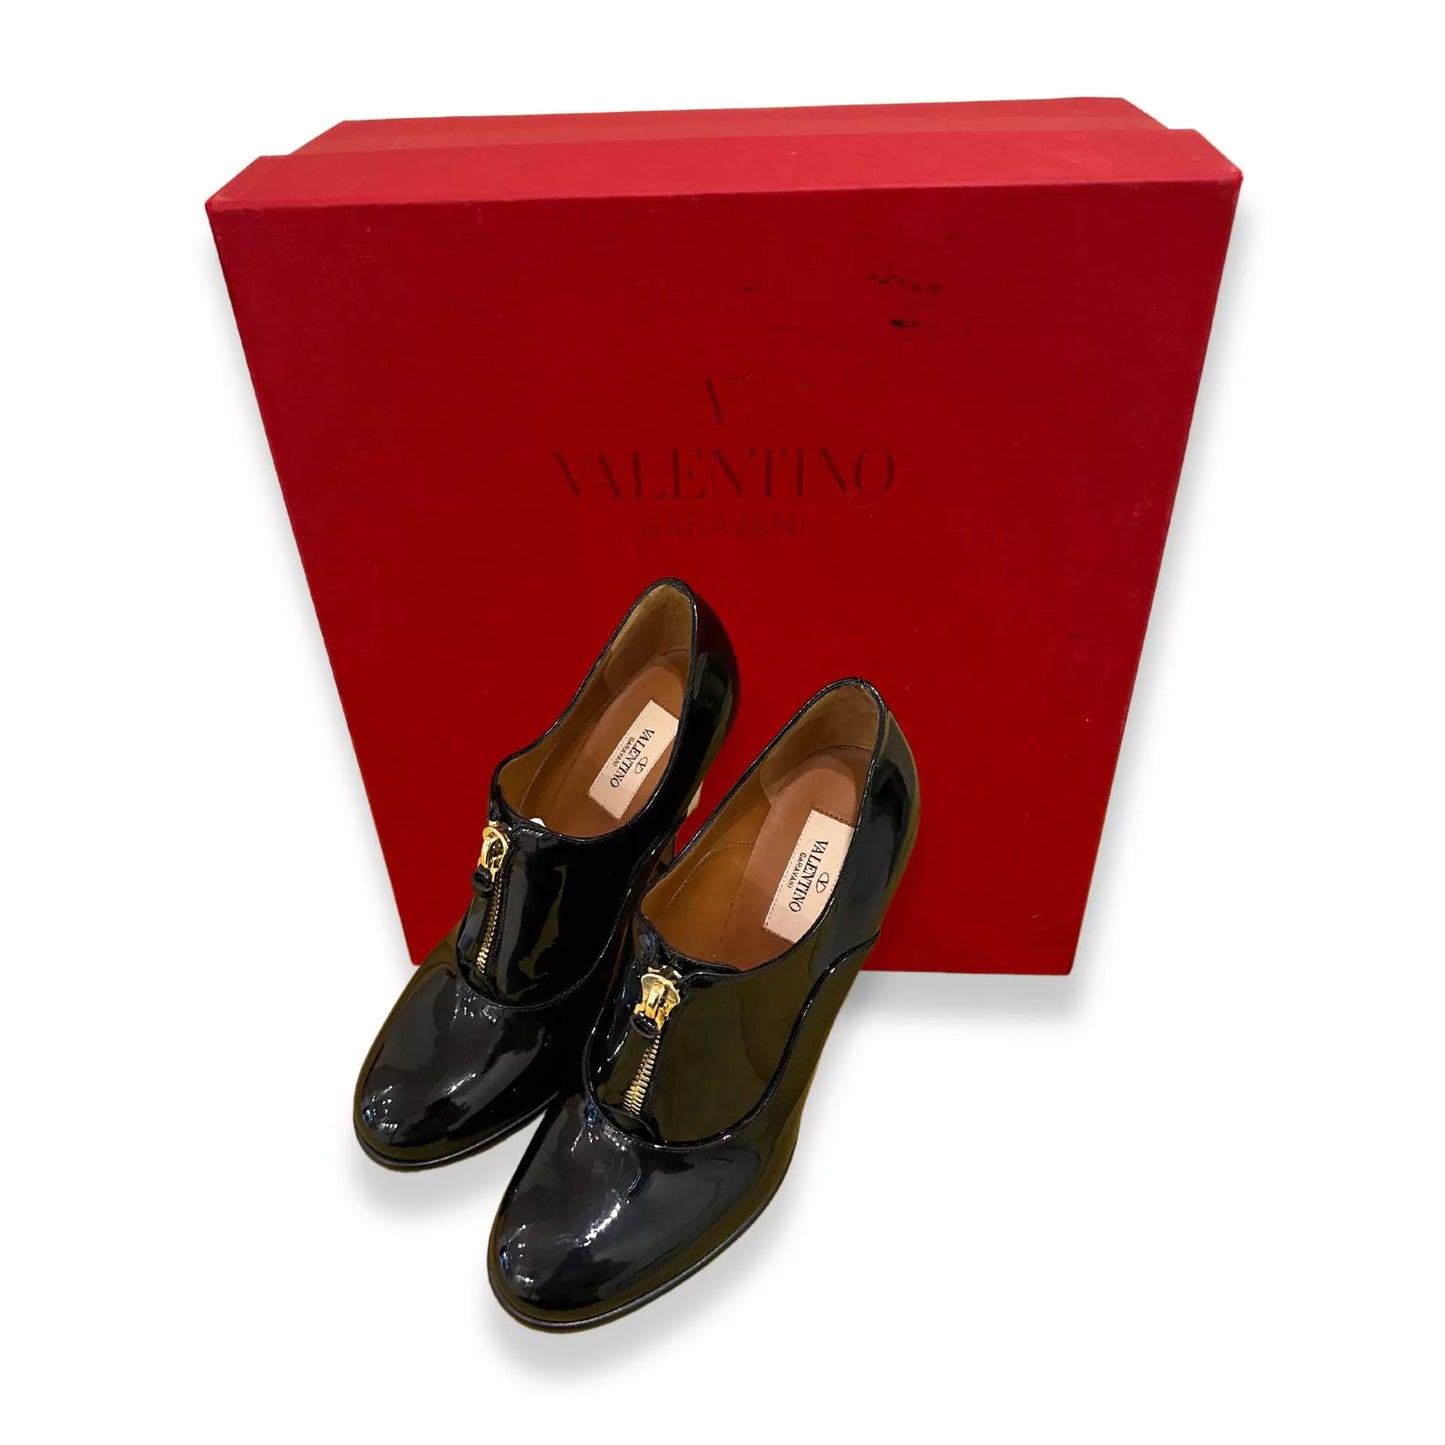 VALENTINO BLACK PATENT LEATHER HEELS SHOES